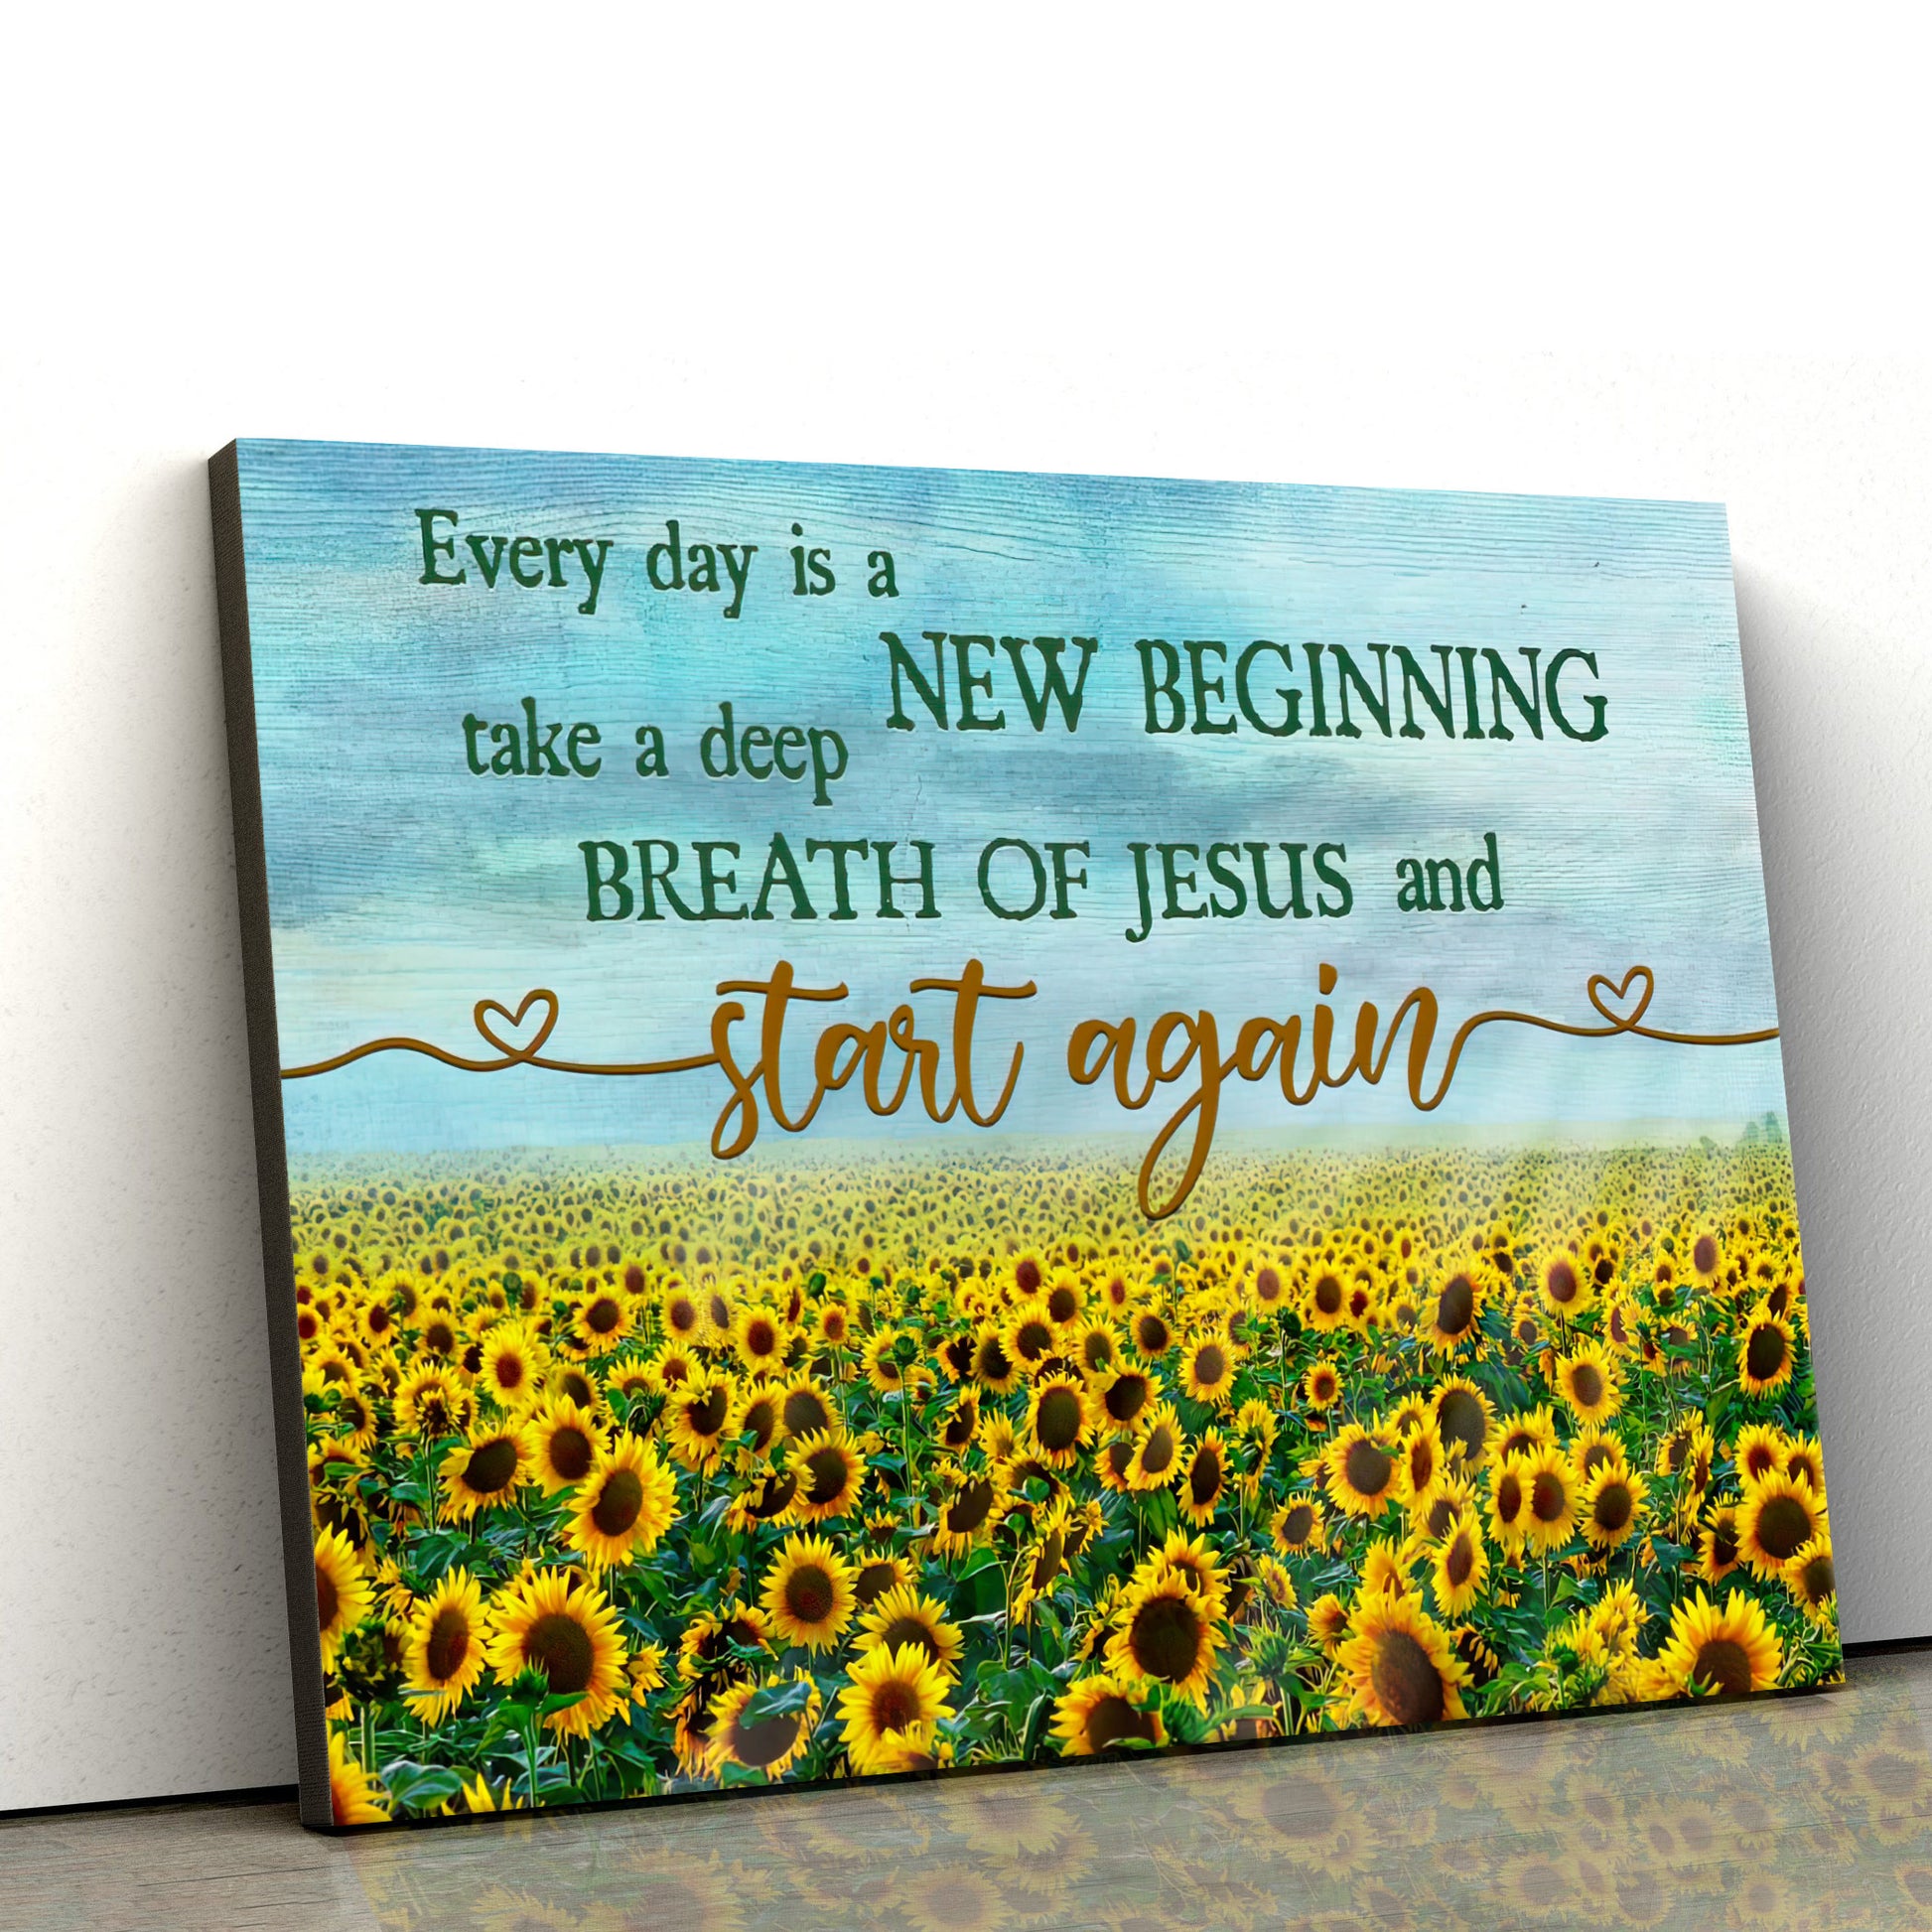 Every Day Is A New Beginning Breath Of Jesus Wall Art Canvas - Sunflower Christian Wall Decor